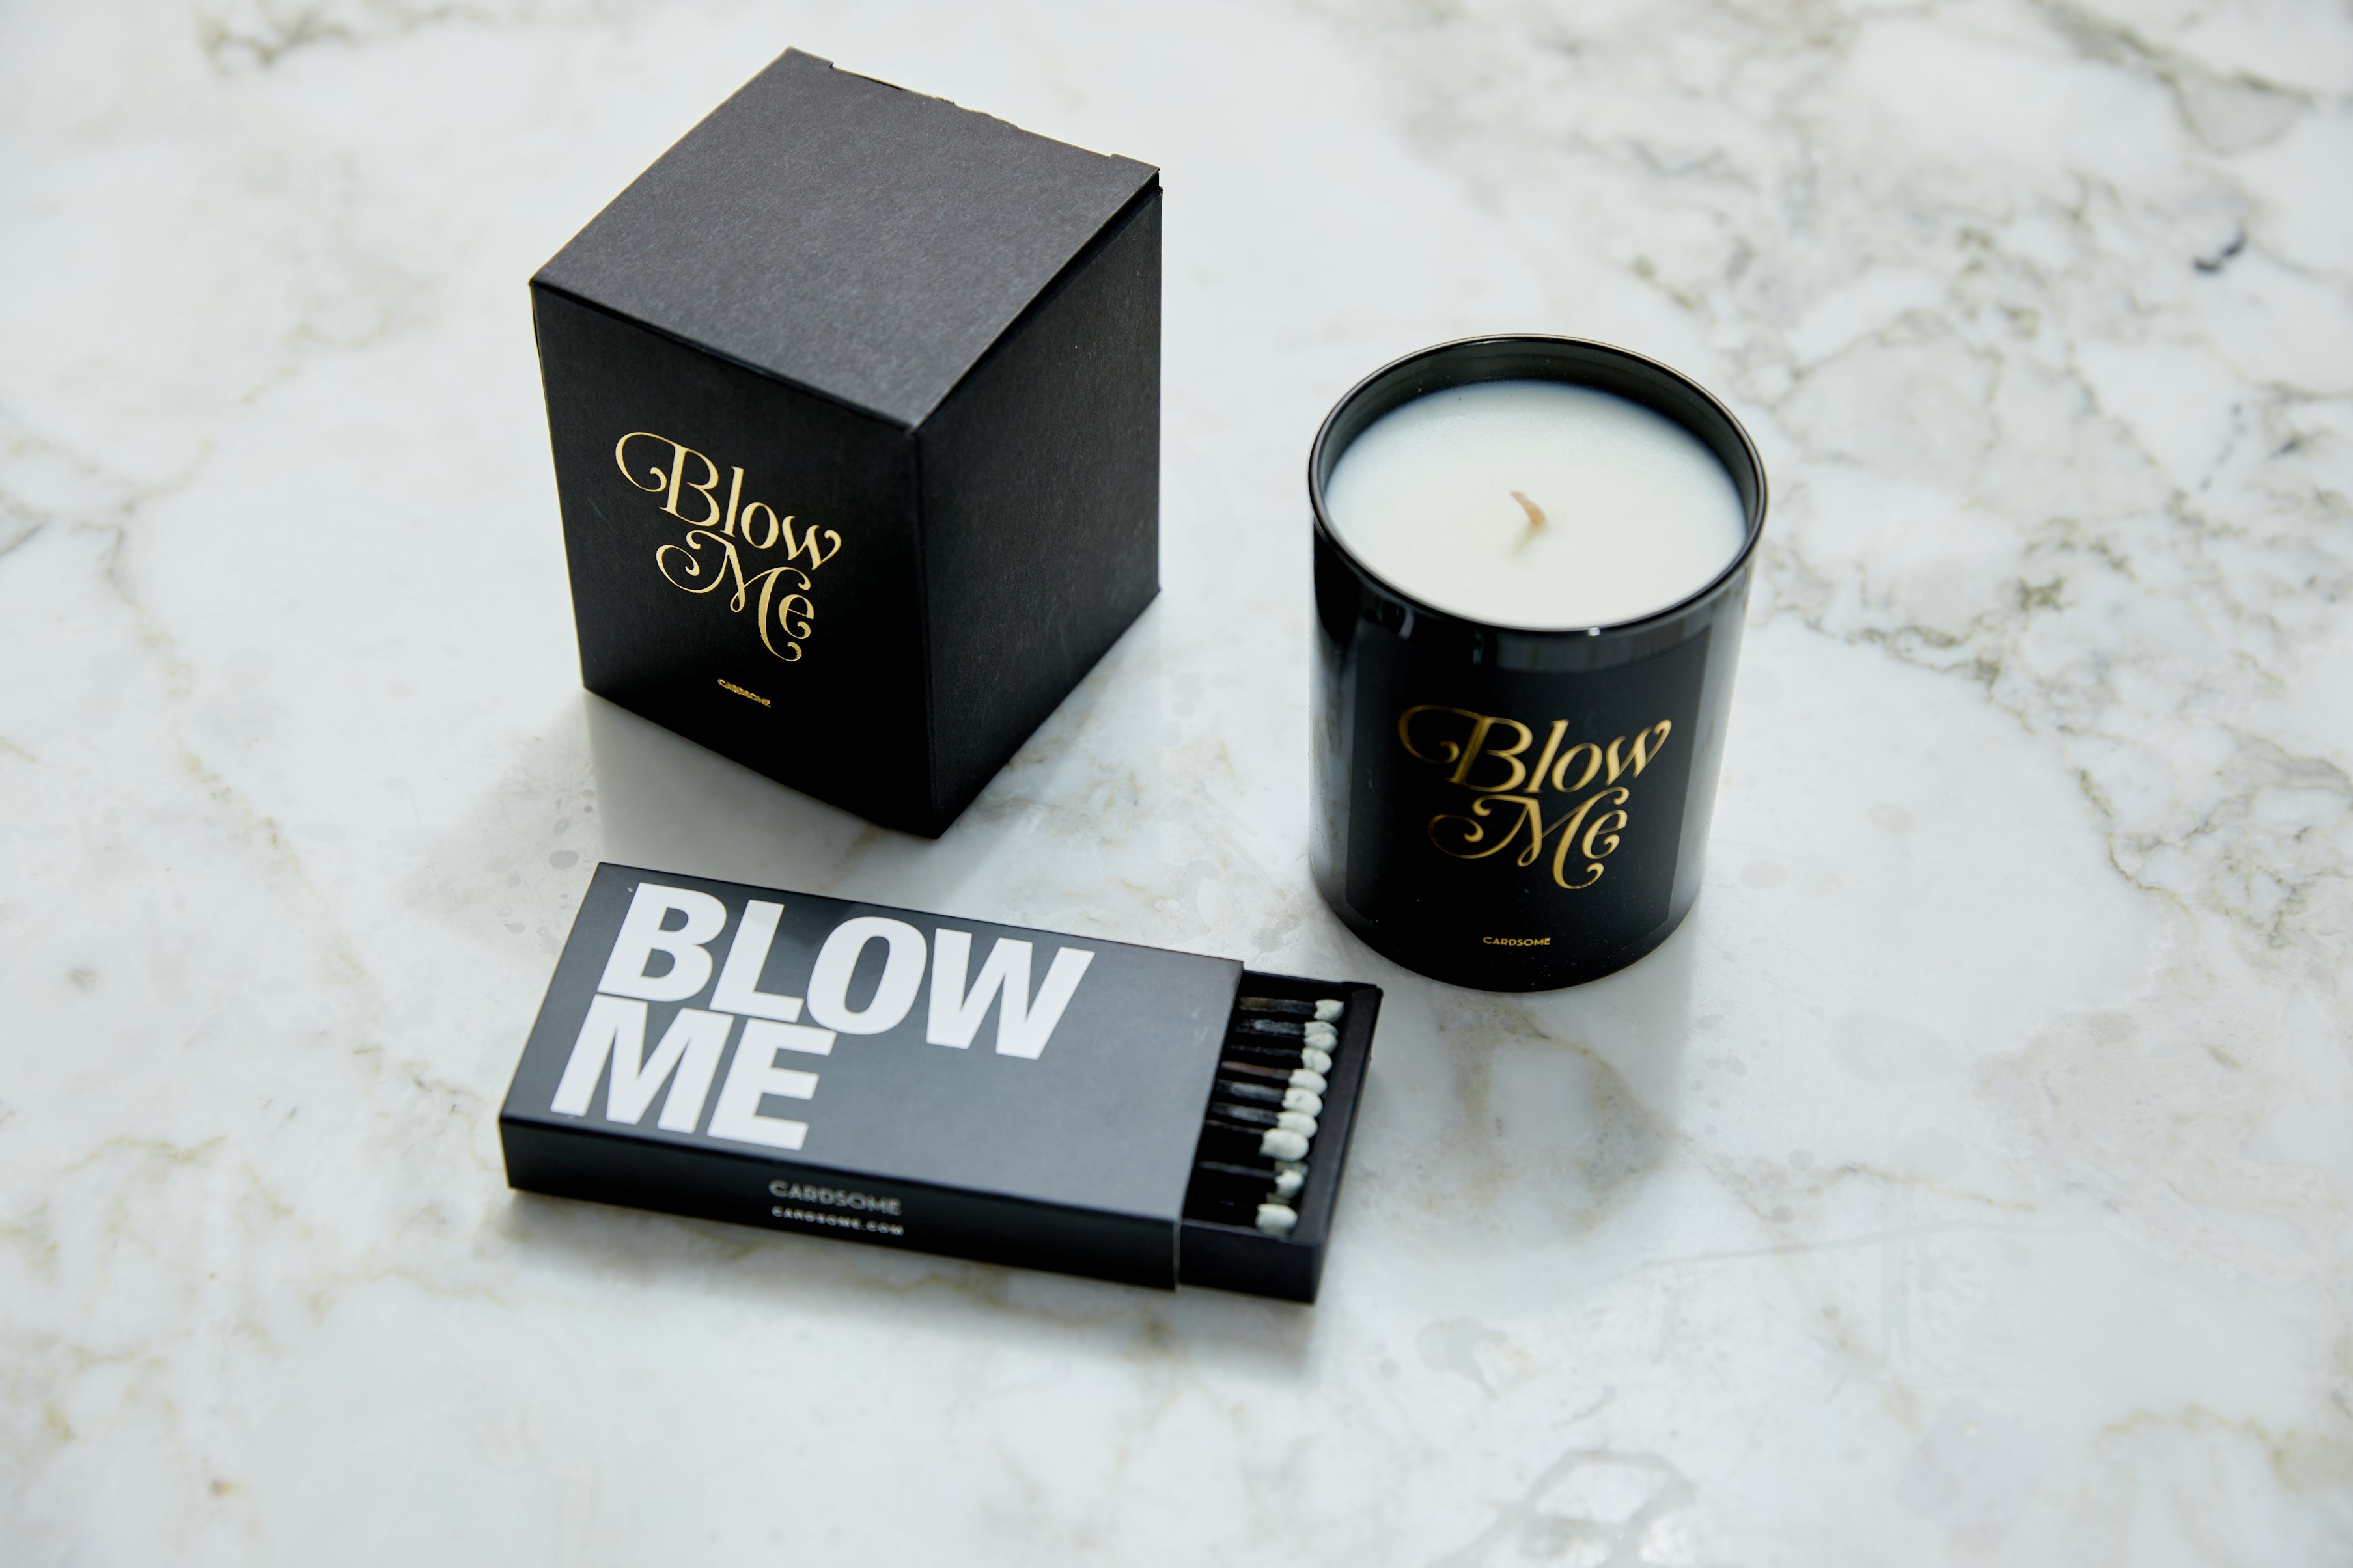 “Blow me” Candle & Match Gift Bundle